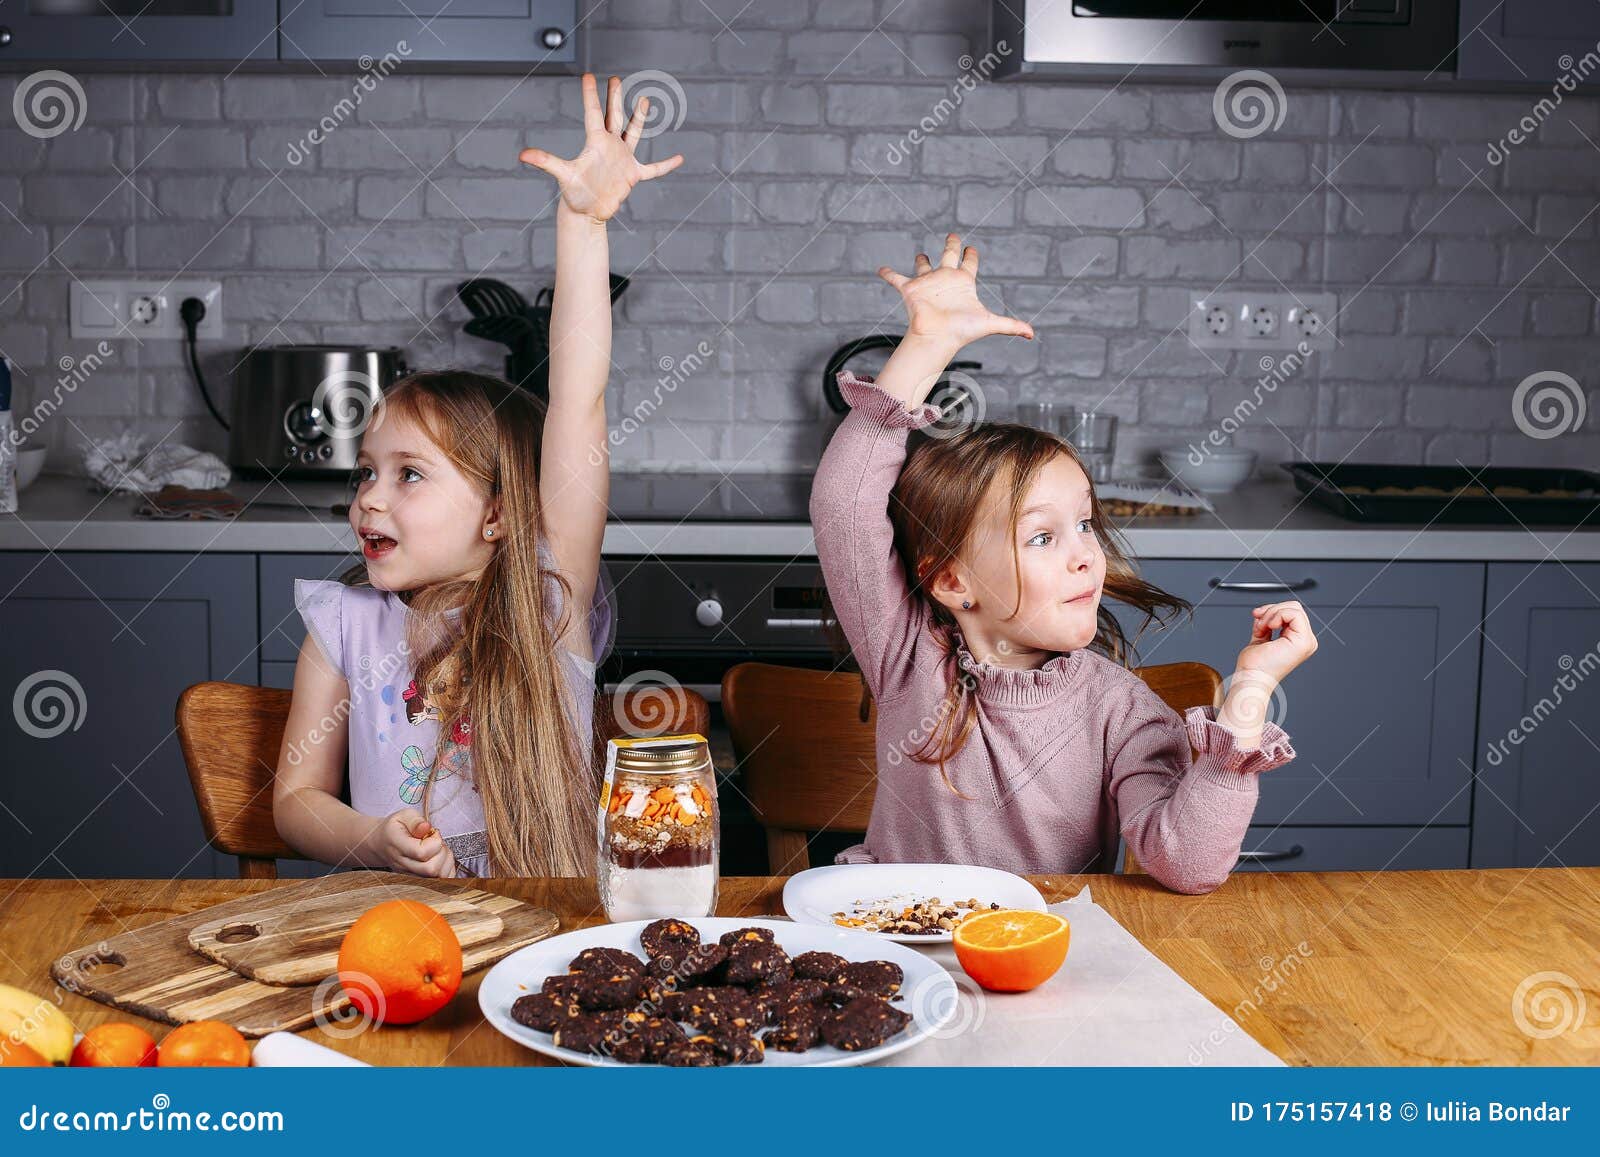 young girls eating biscuits at home